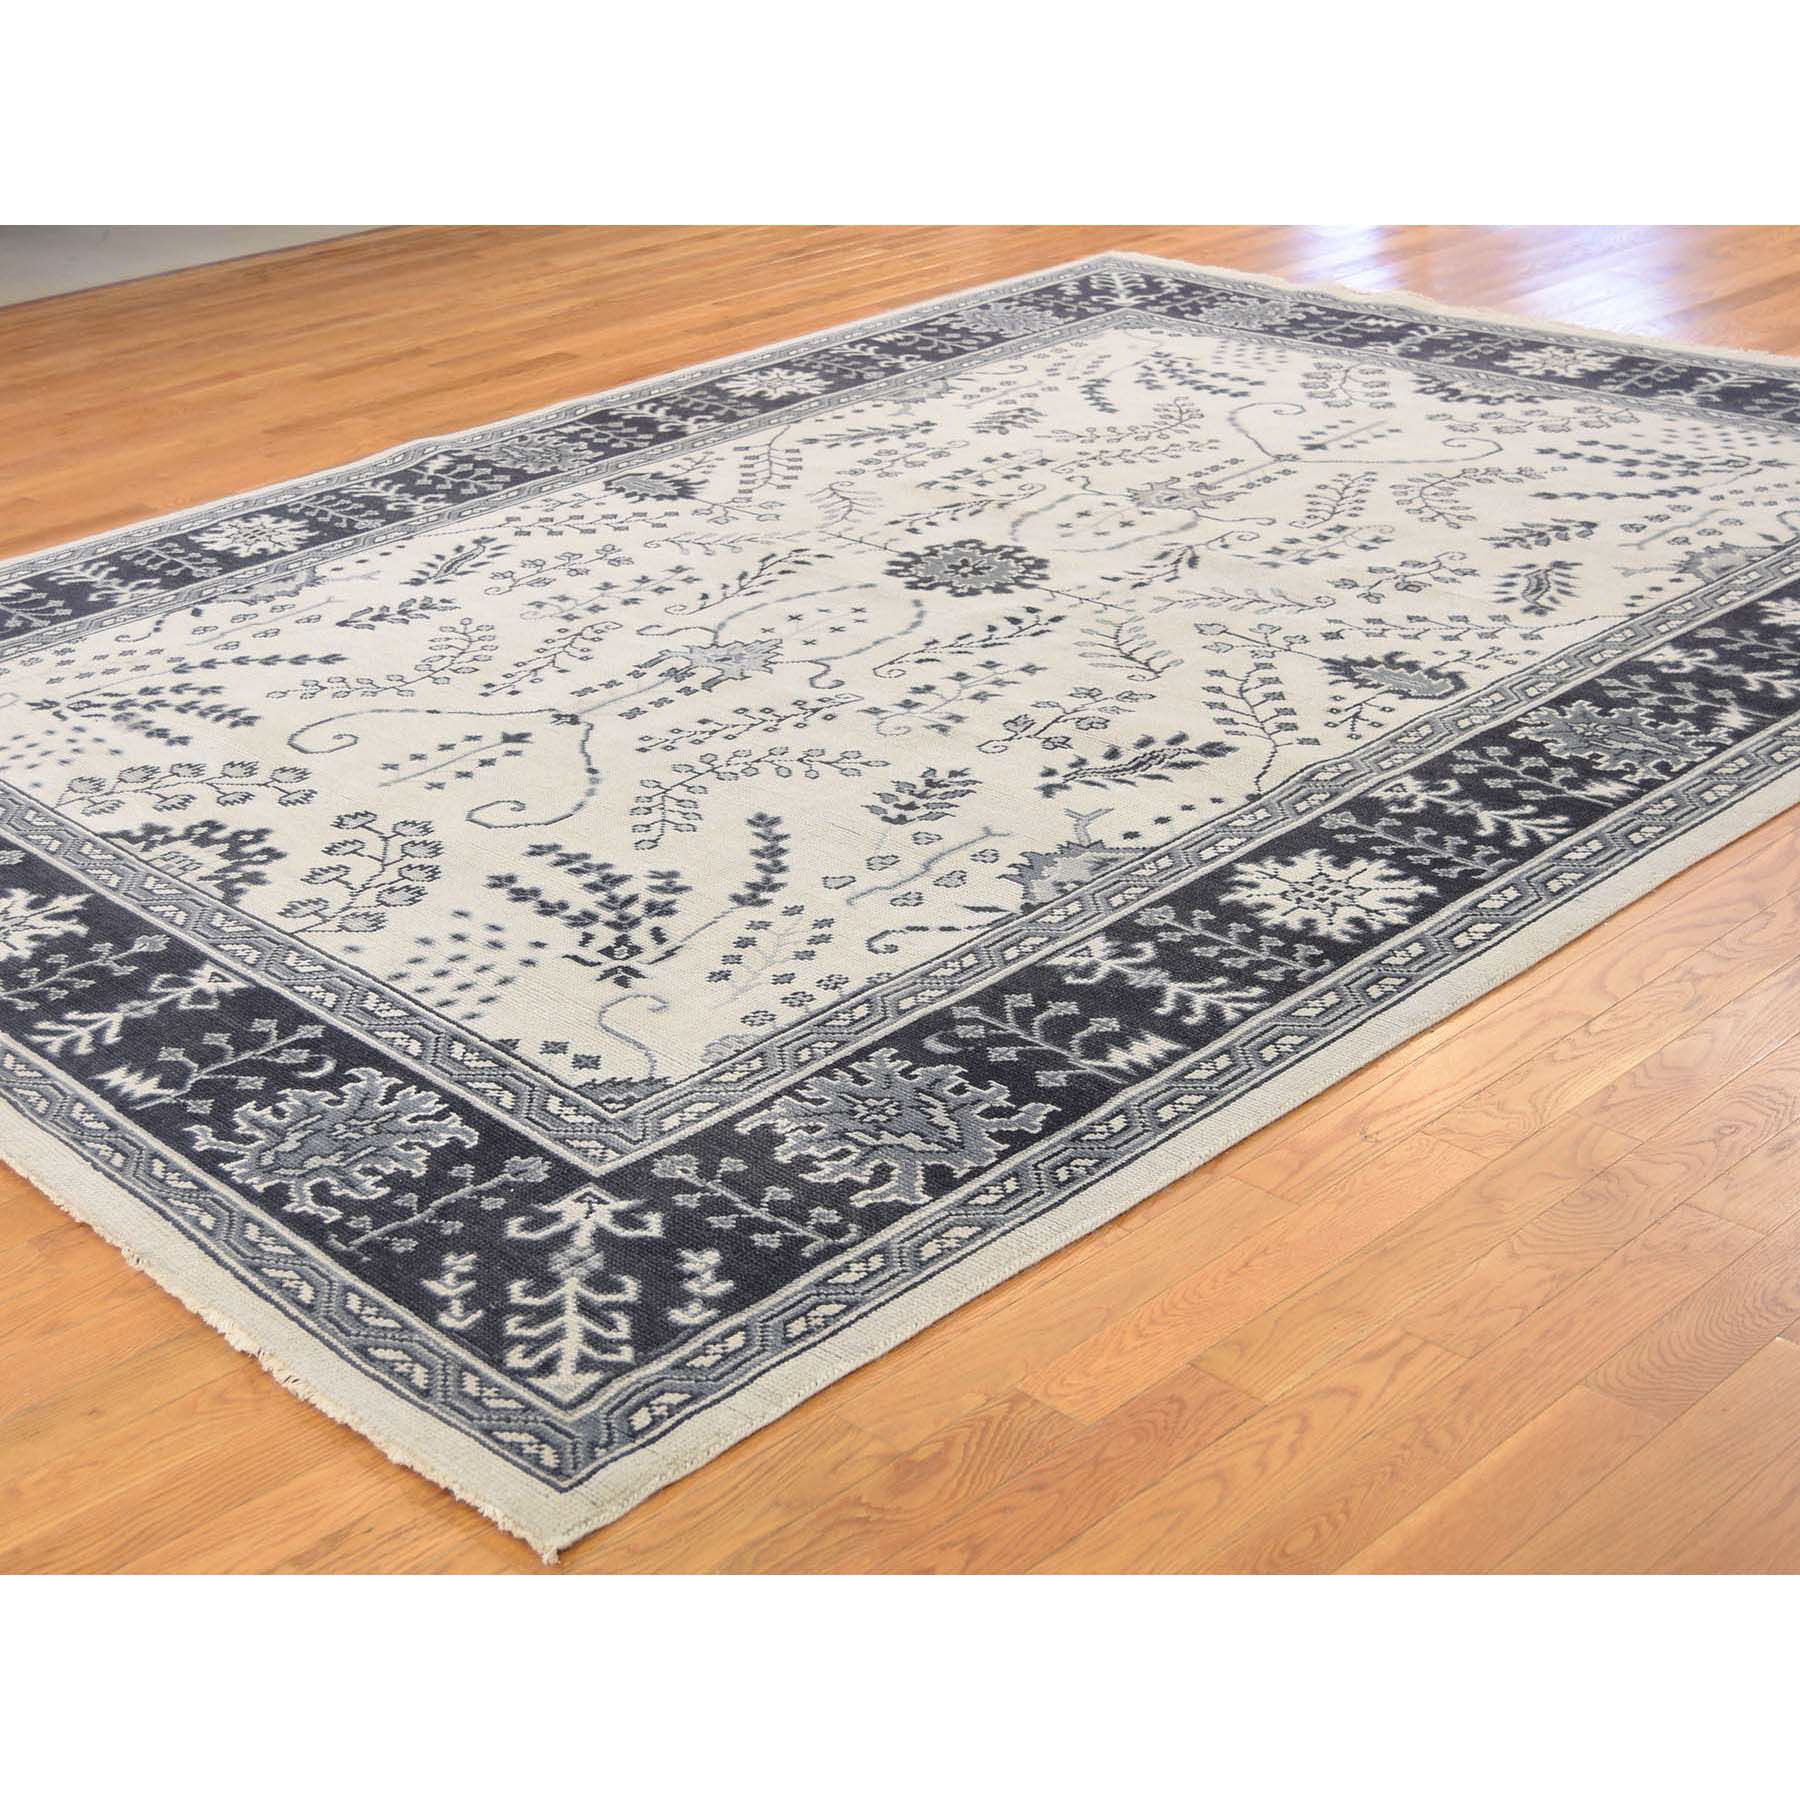 8-x10- Ivory Turkish Knot Oushak Hand-Knotted Pure Wool Oriental Rug 